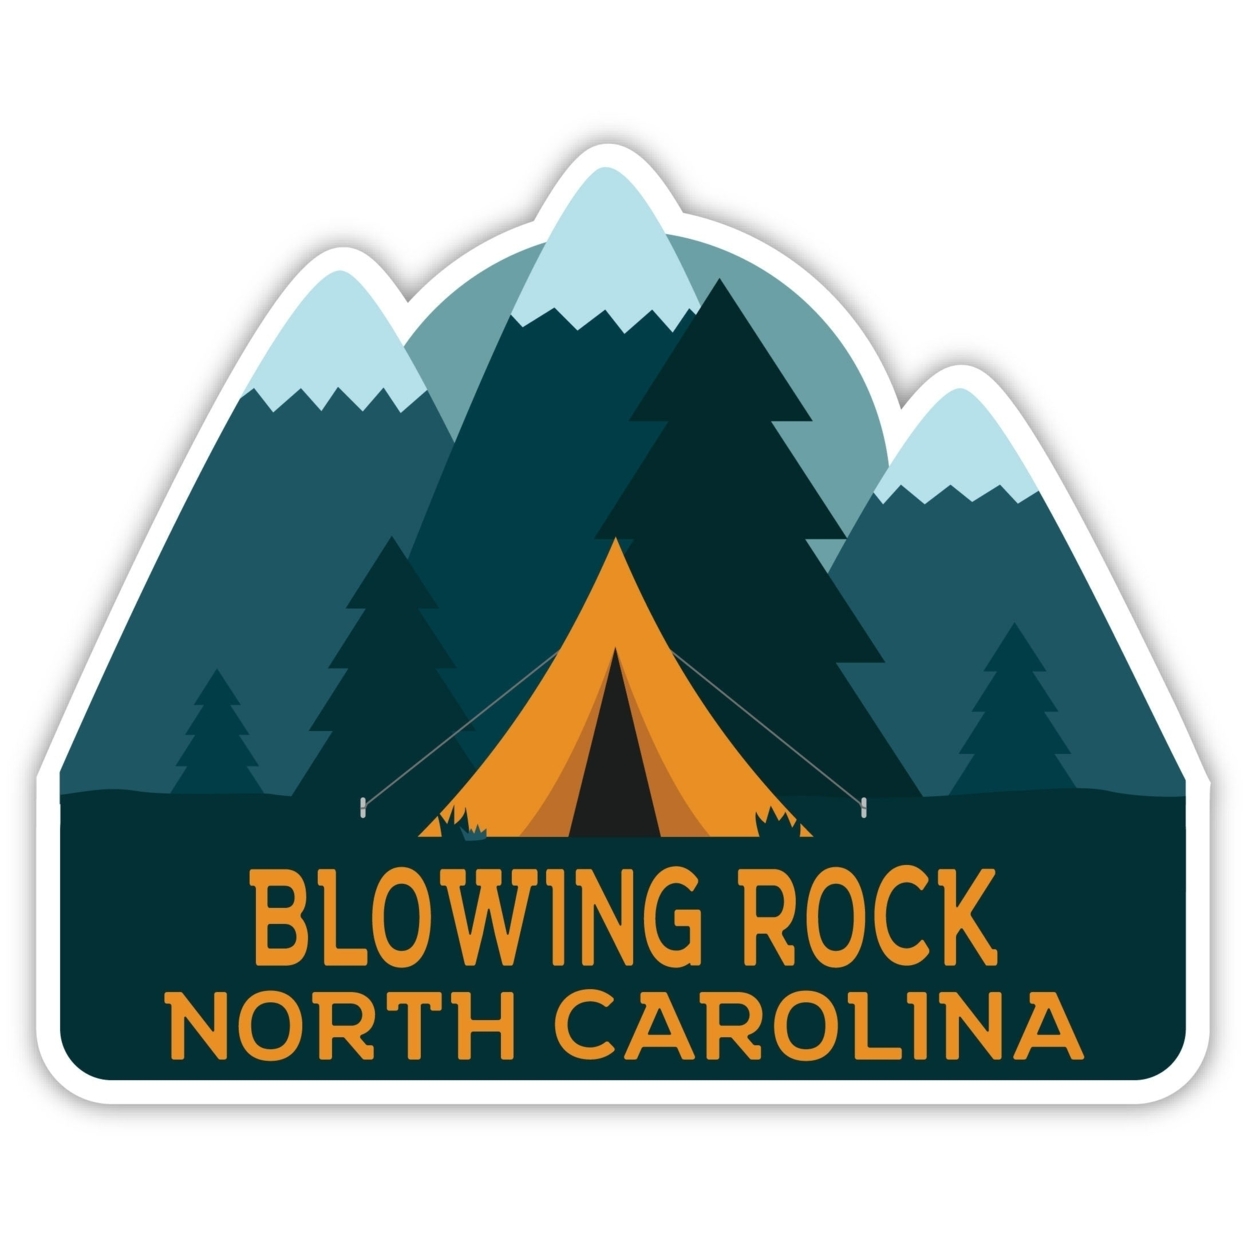 Blowing Rock North Carolina Souvenir Decorative Stickers (Choose Theme And Size) - 4-Pack, 10-Inch, Camp Life